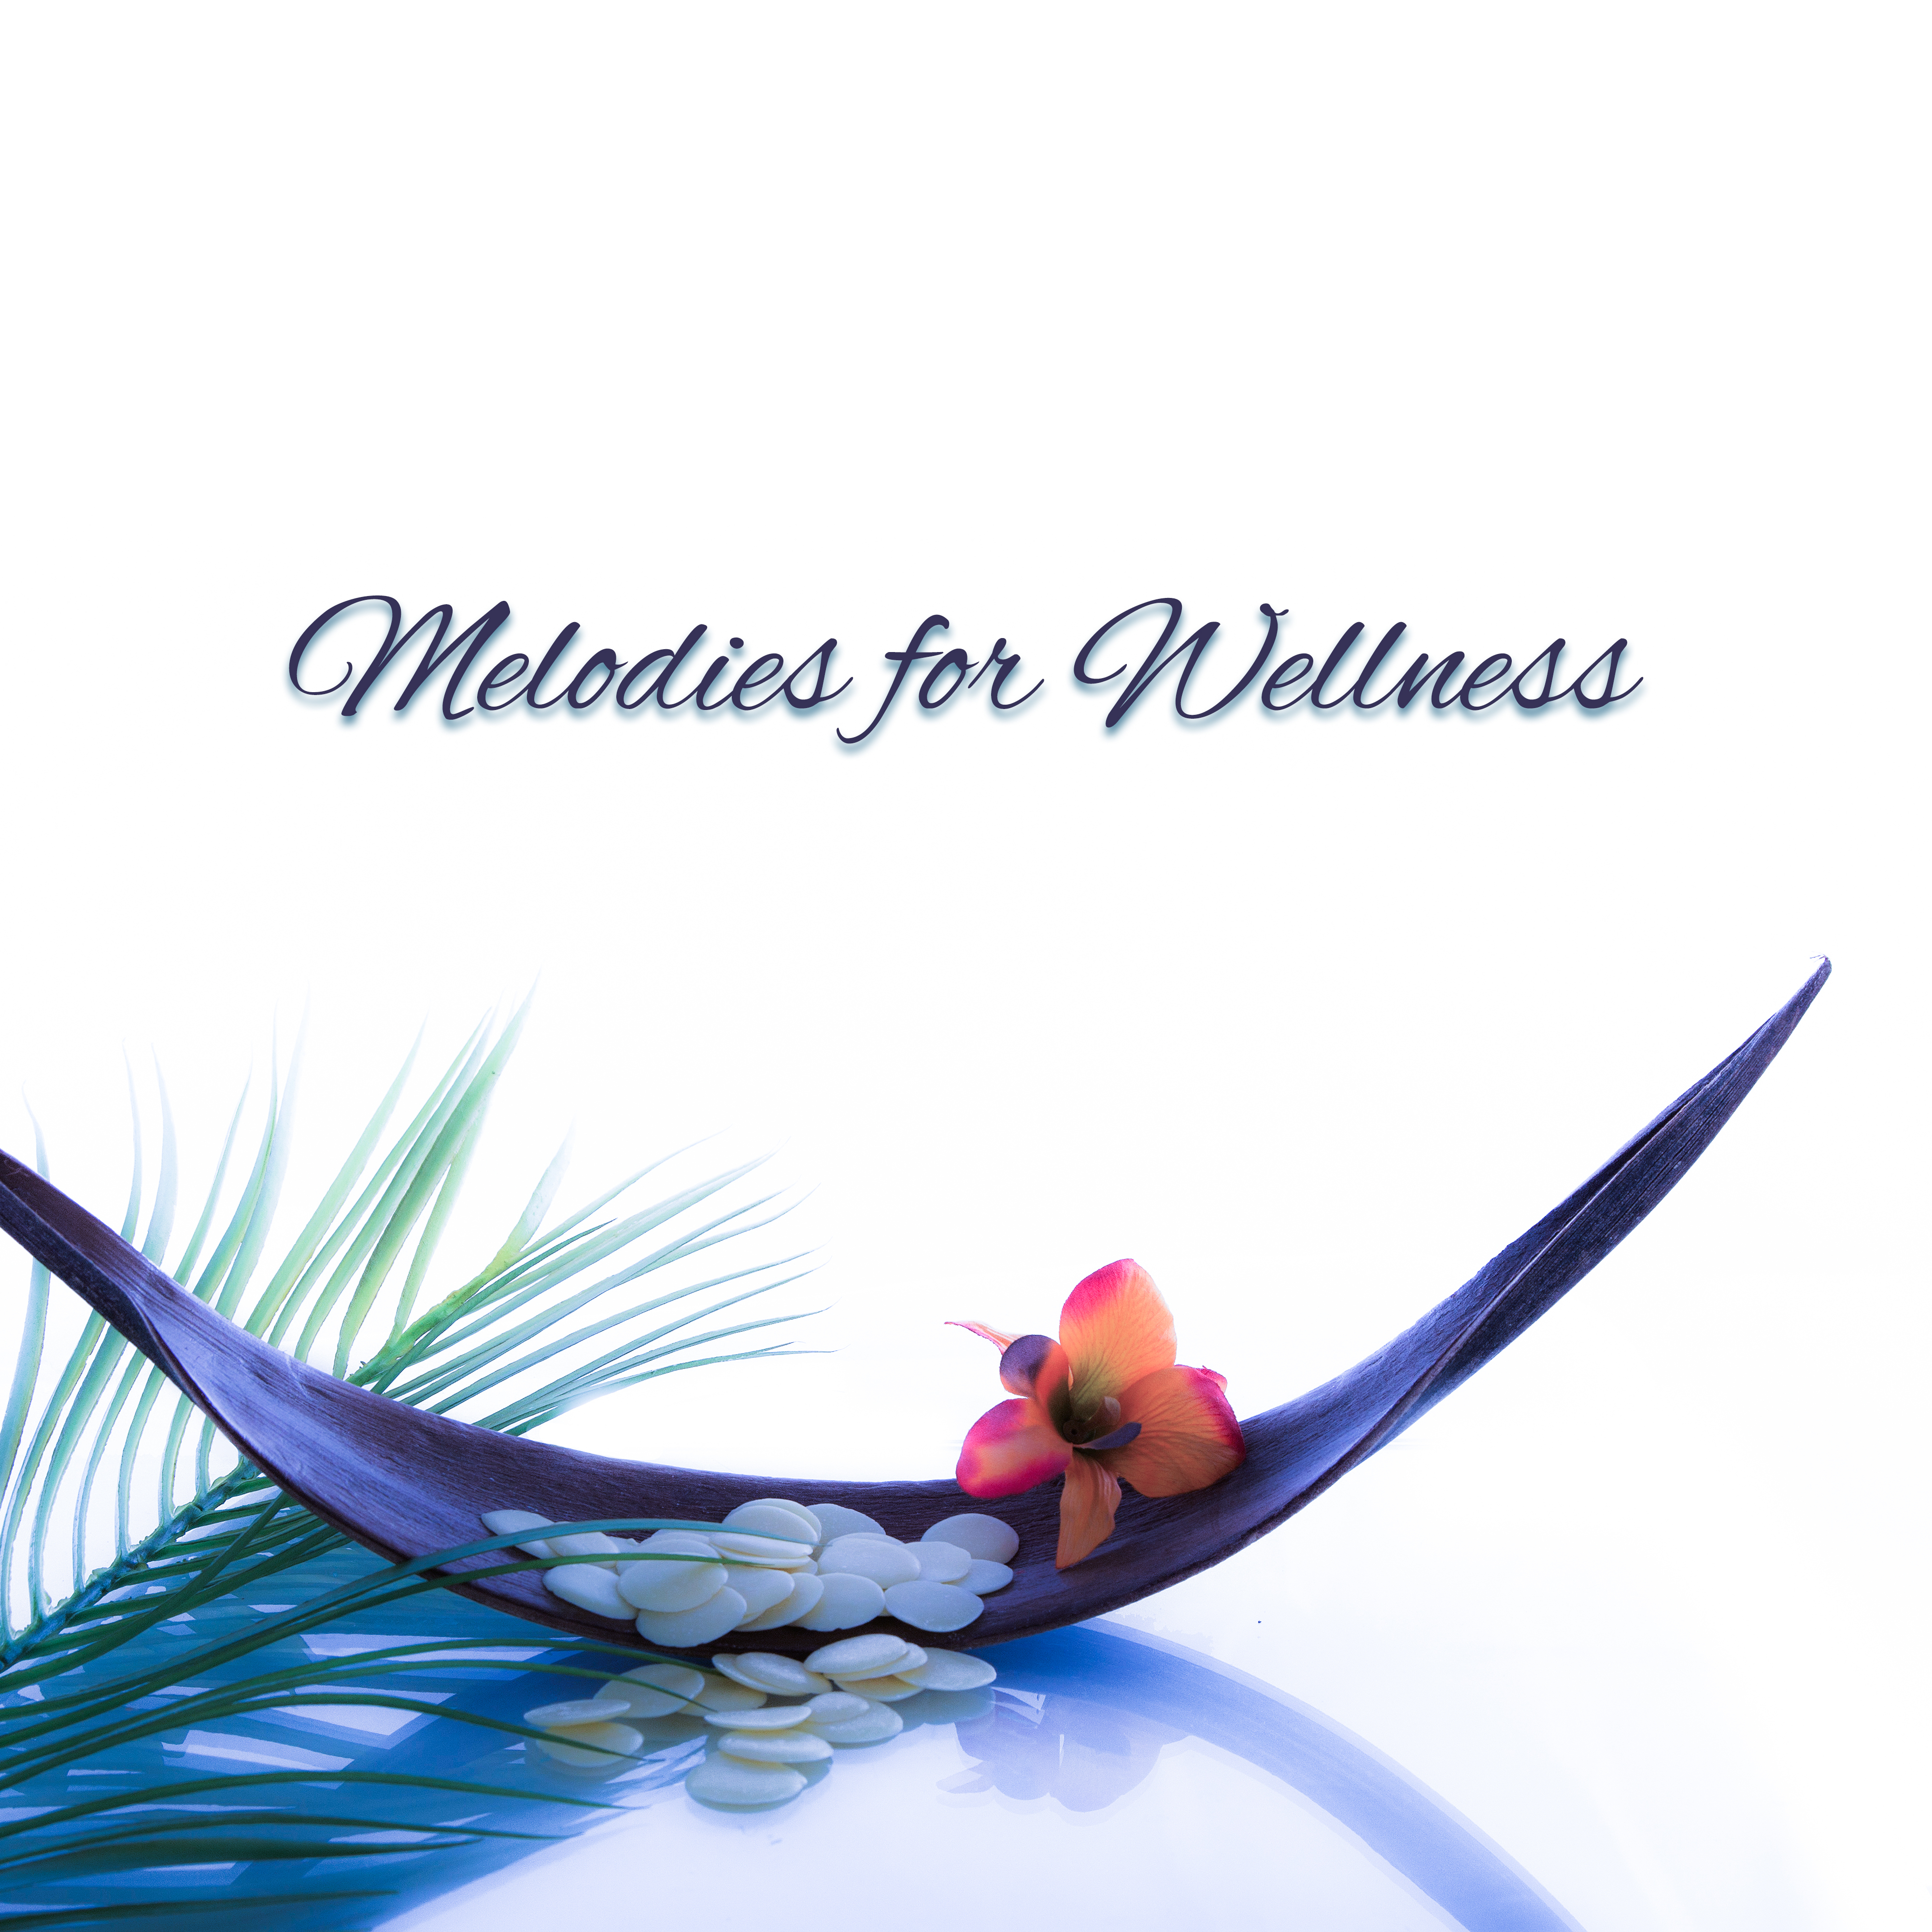 Melodies for Wellness  Spa Music, Relax, Massage Therapy, Healing Body, Relaxed Soul, Relaxation Wellness, Soft Nature Sounds, Zen Music, Soothing Piano